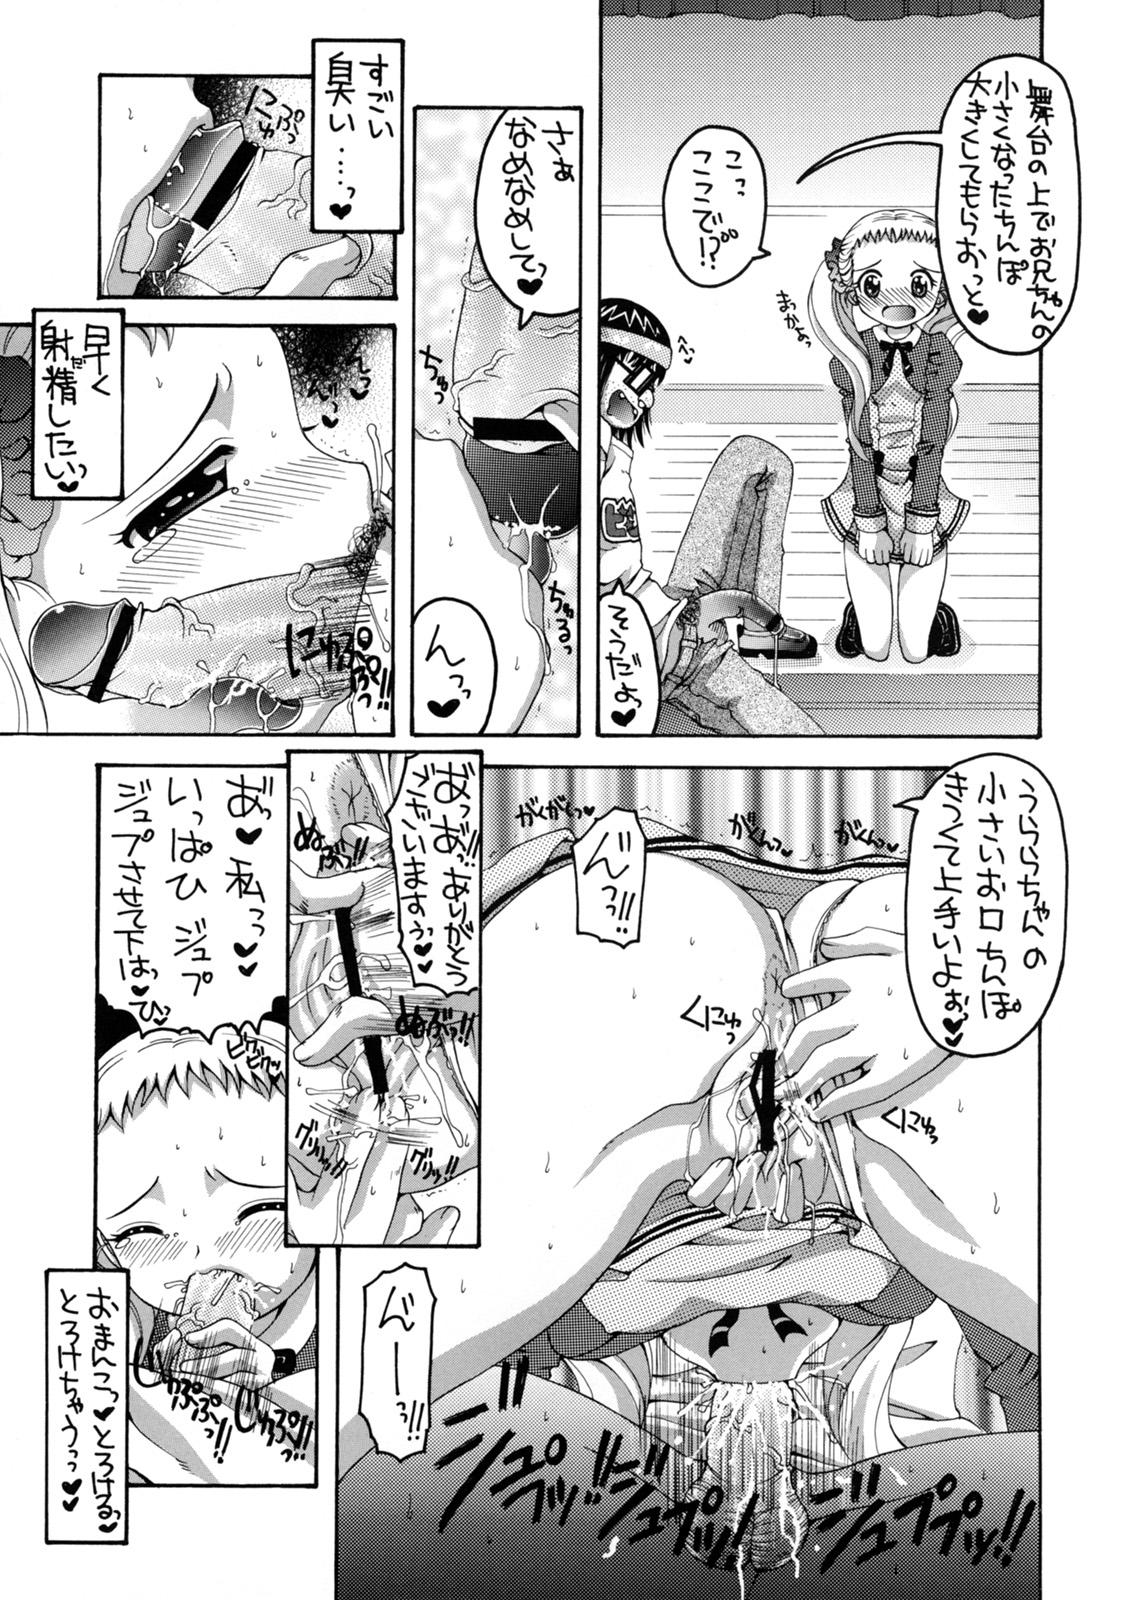 Anime Yes! Five 3 - Pretty cure Yes precure 5 Coroa - Page 6